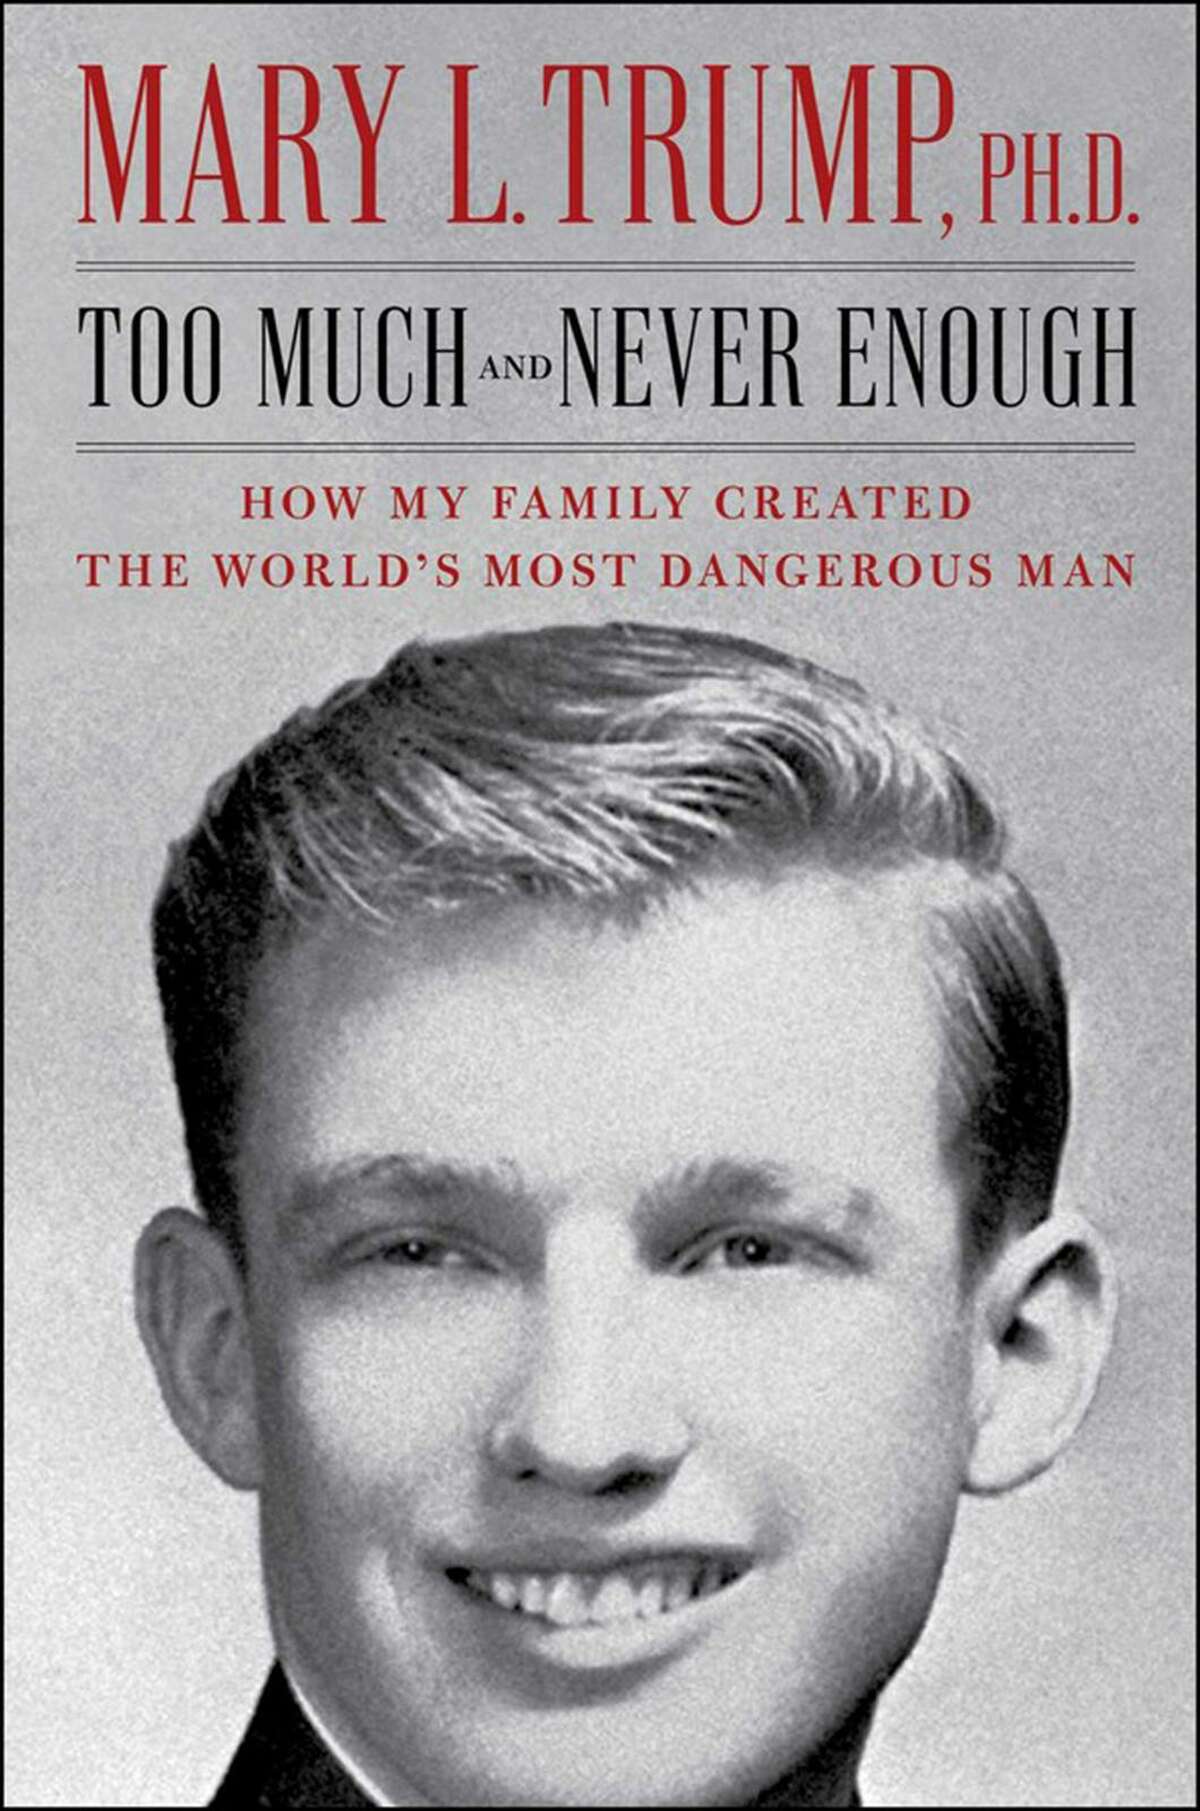 "Too Much and Never Enough" by Mary L. Trump